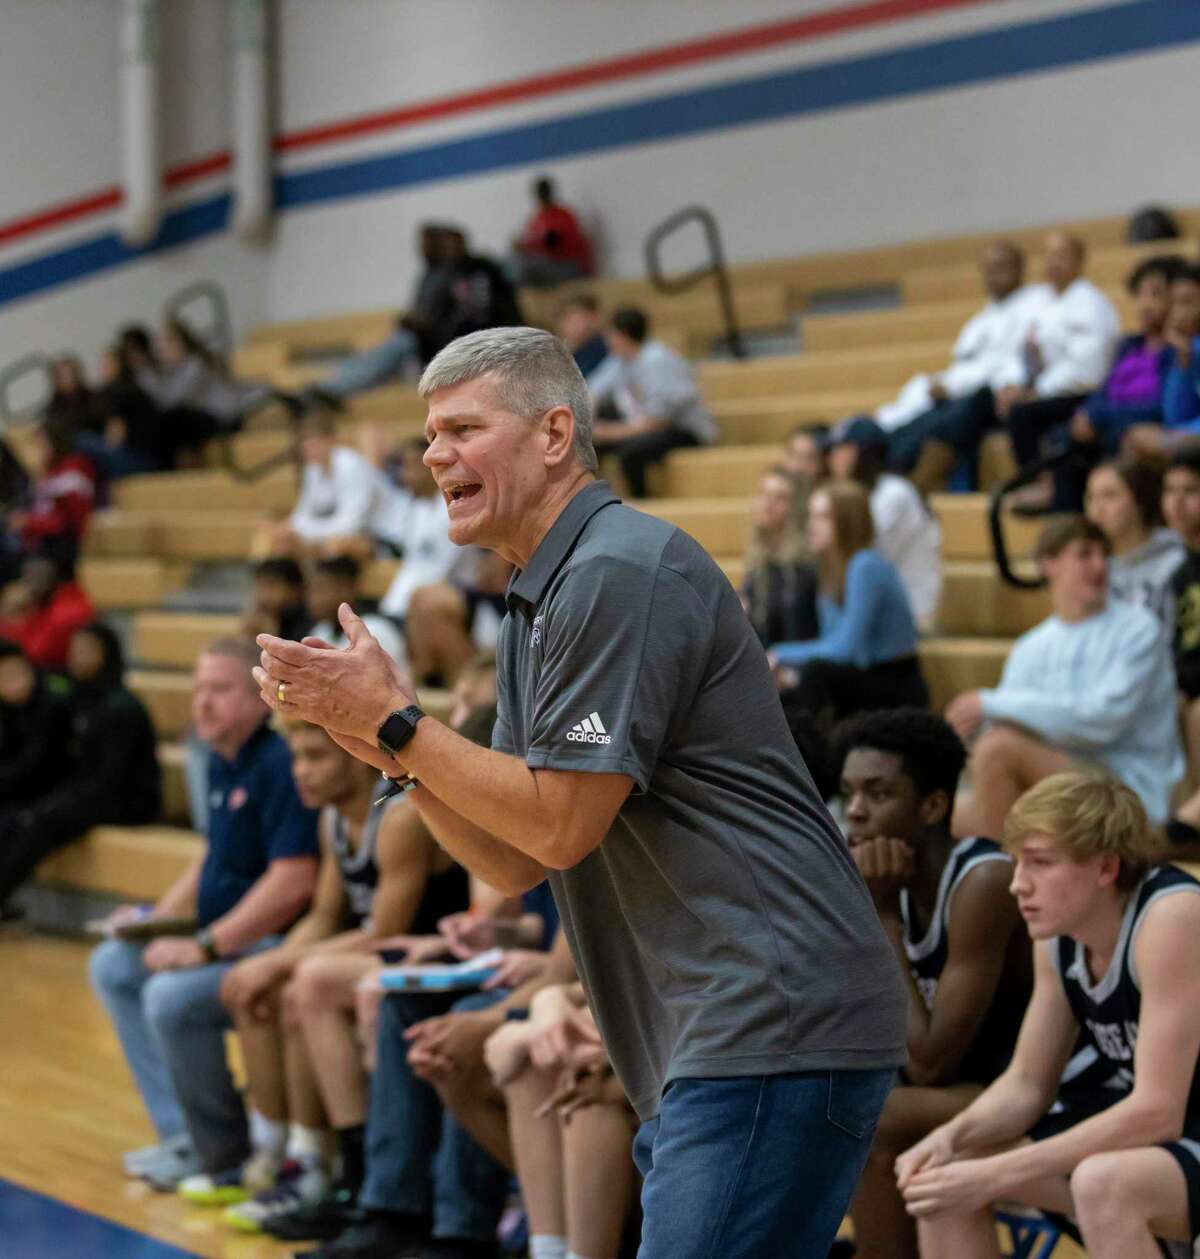 College Park head coach Clifton McNeely, shown here in 2019, won his 600th career game as a high school basketball coach on Friday.